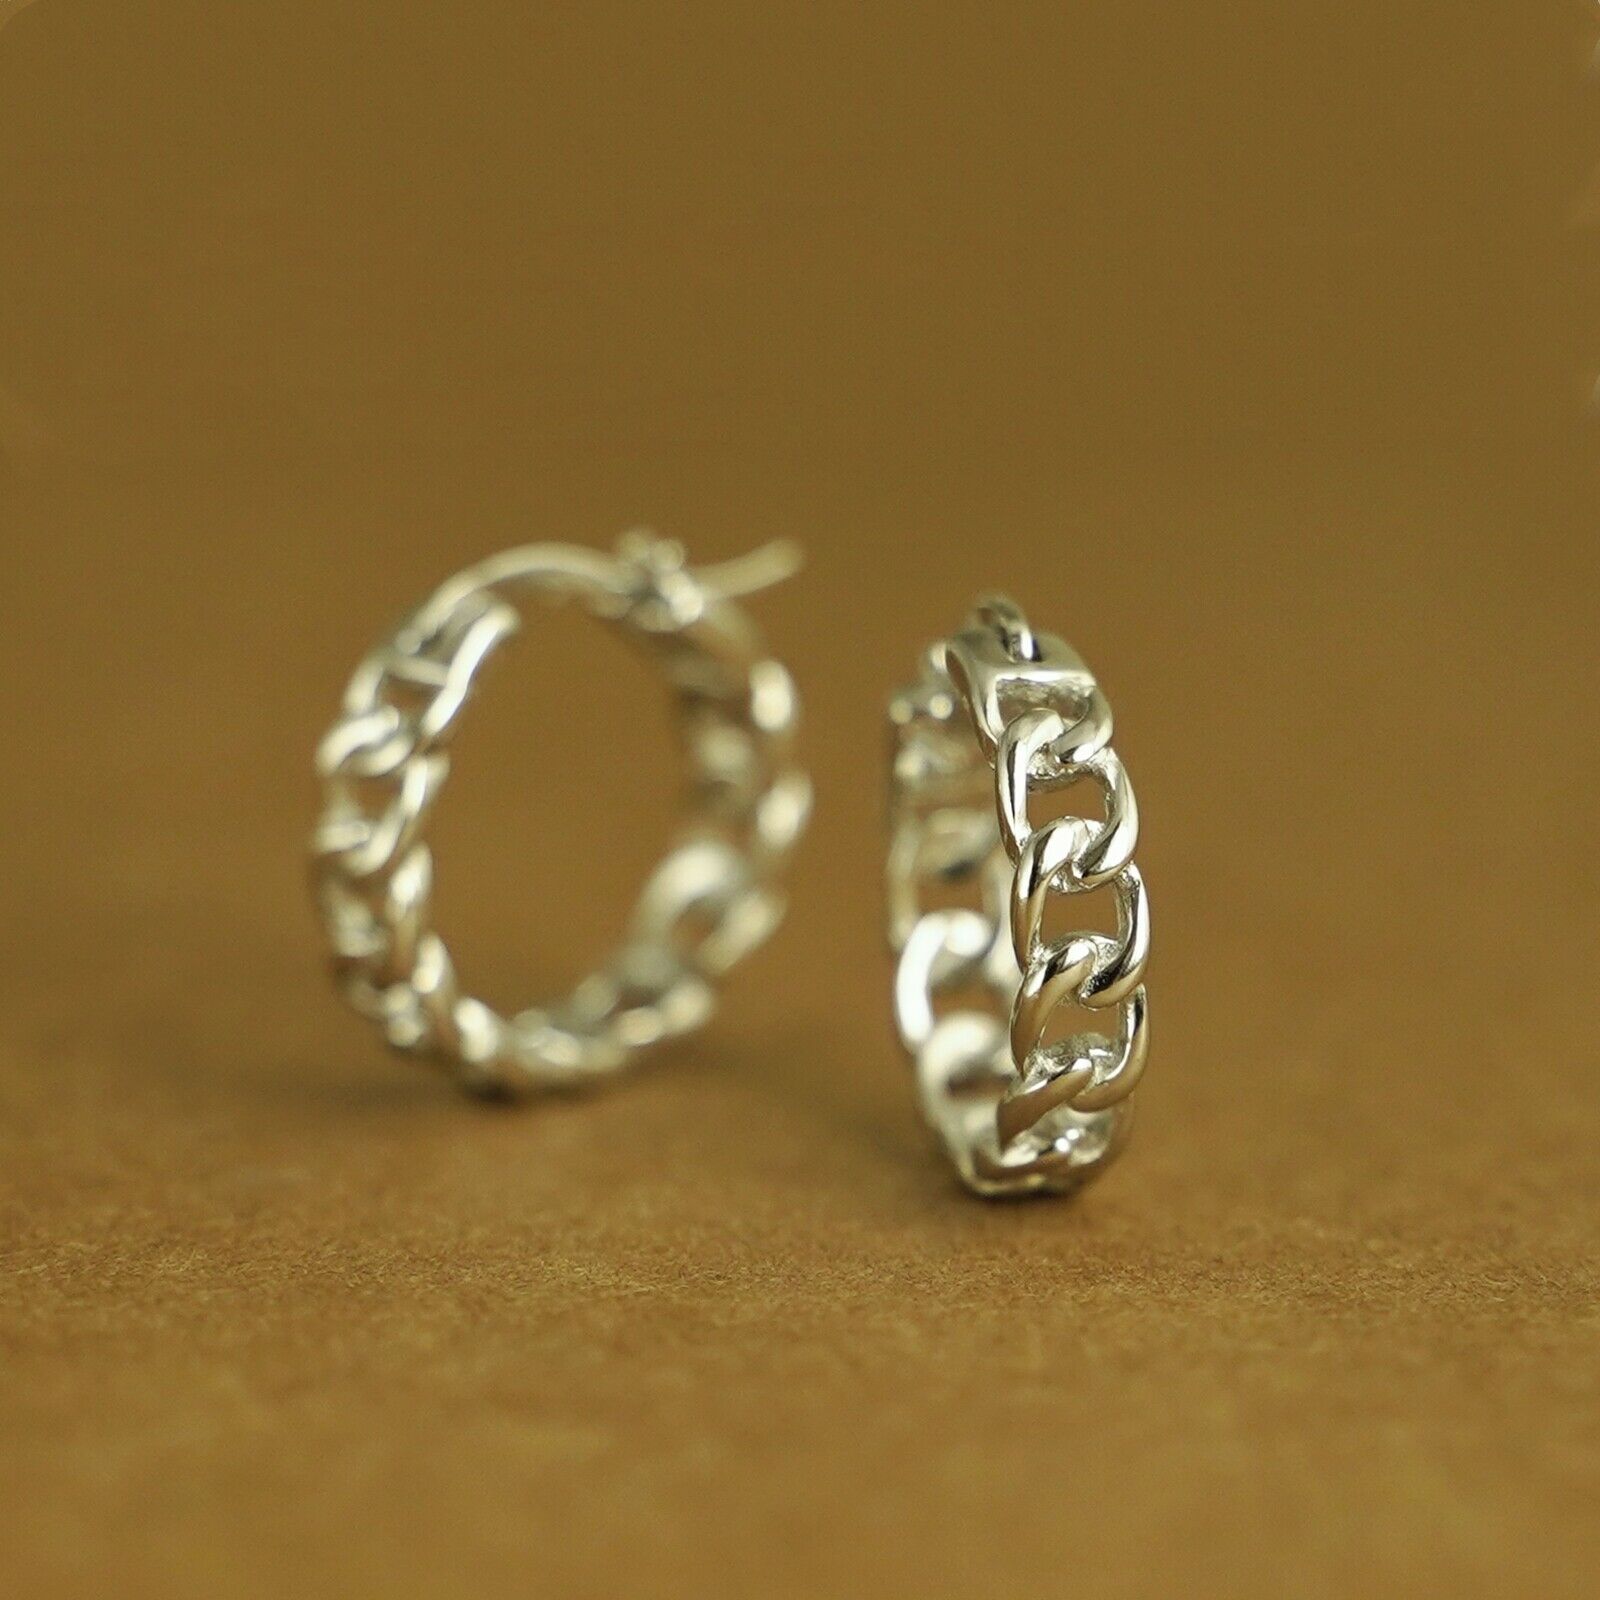 Unisex Sterling Silver Curb Chain Hoop Earrings with French Lock Closure - sugarkittenlondon